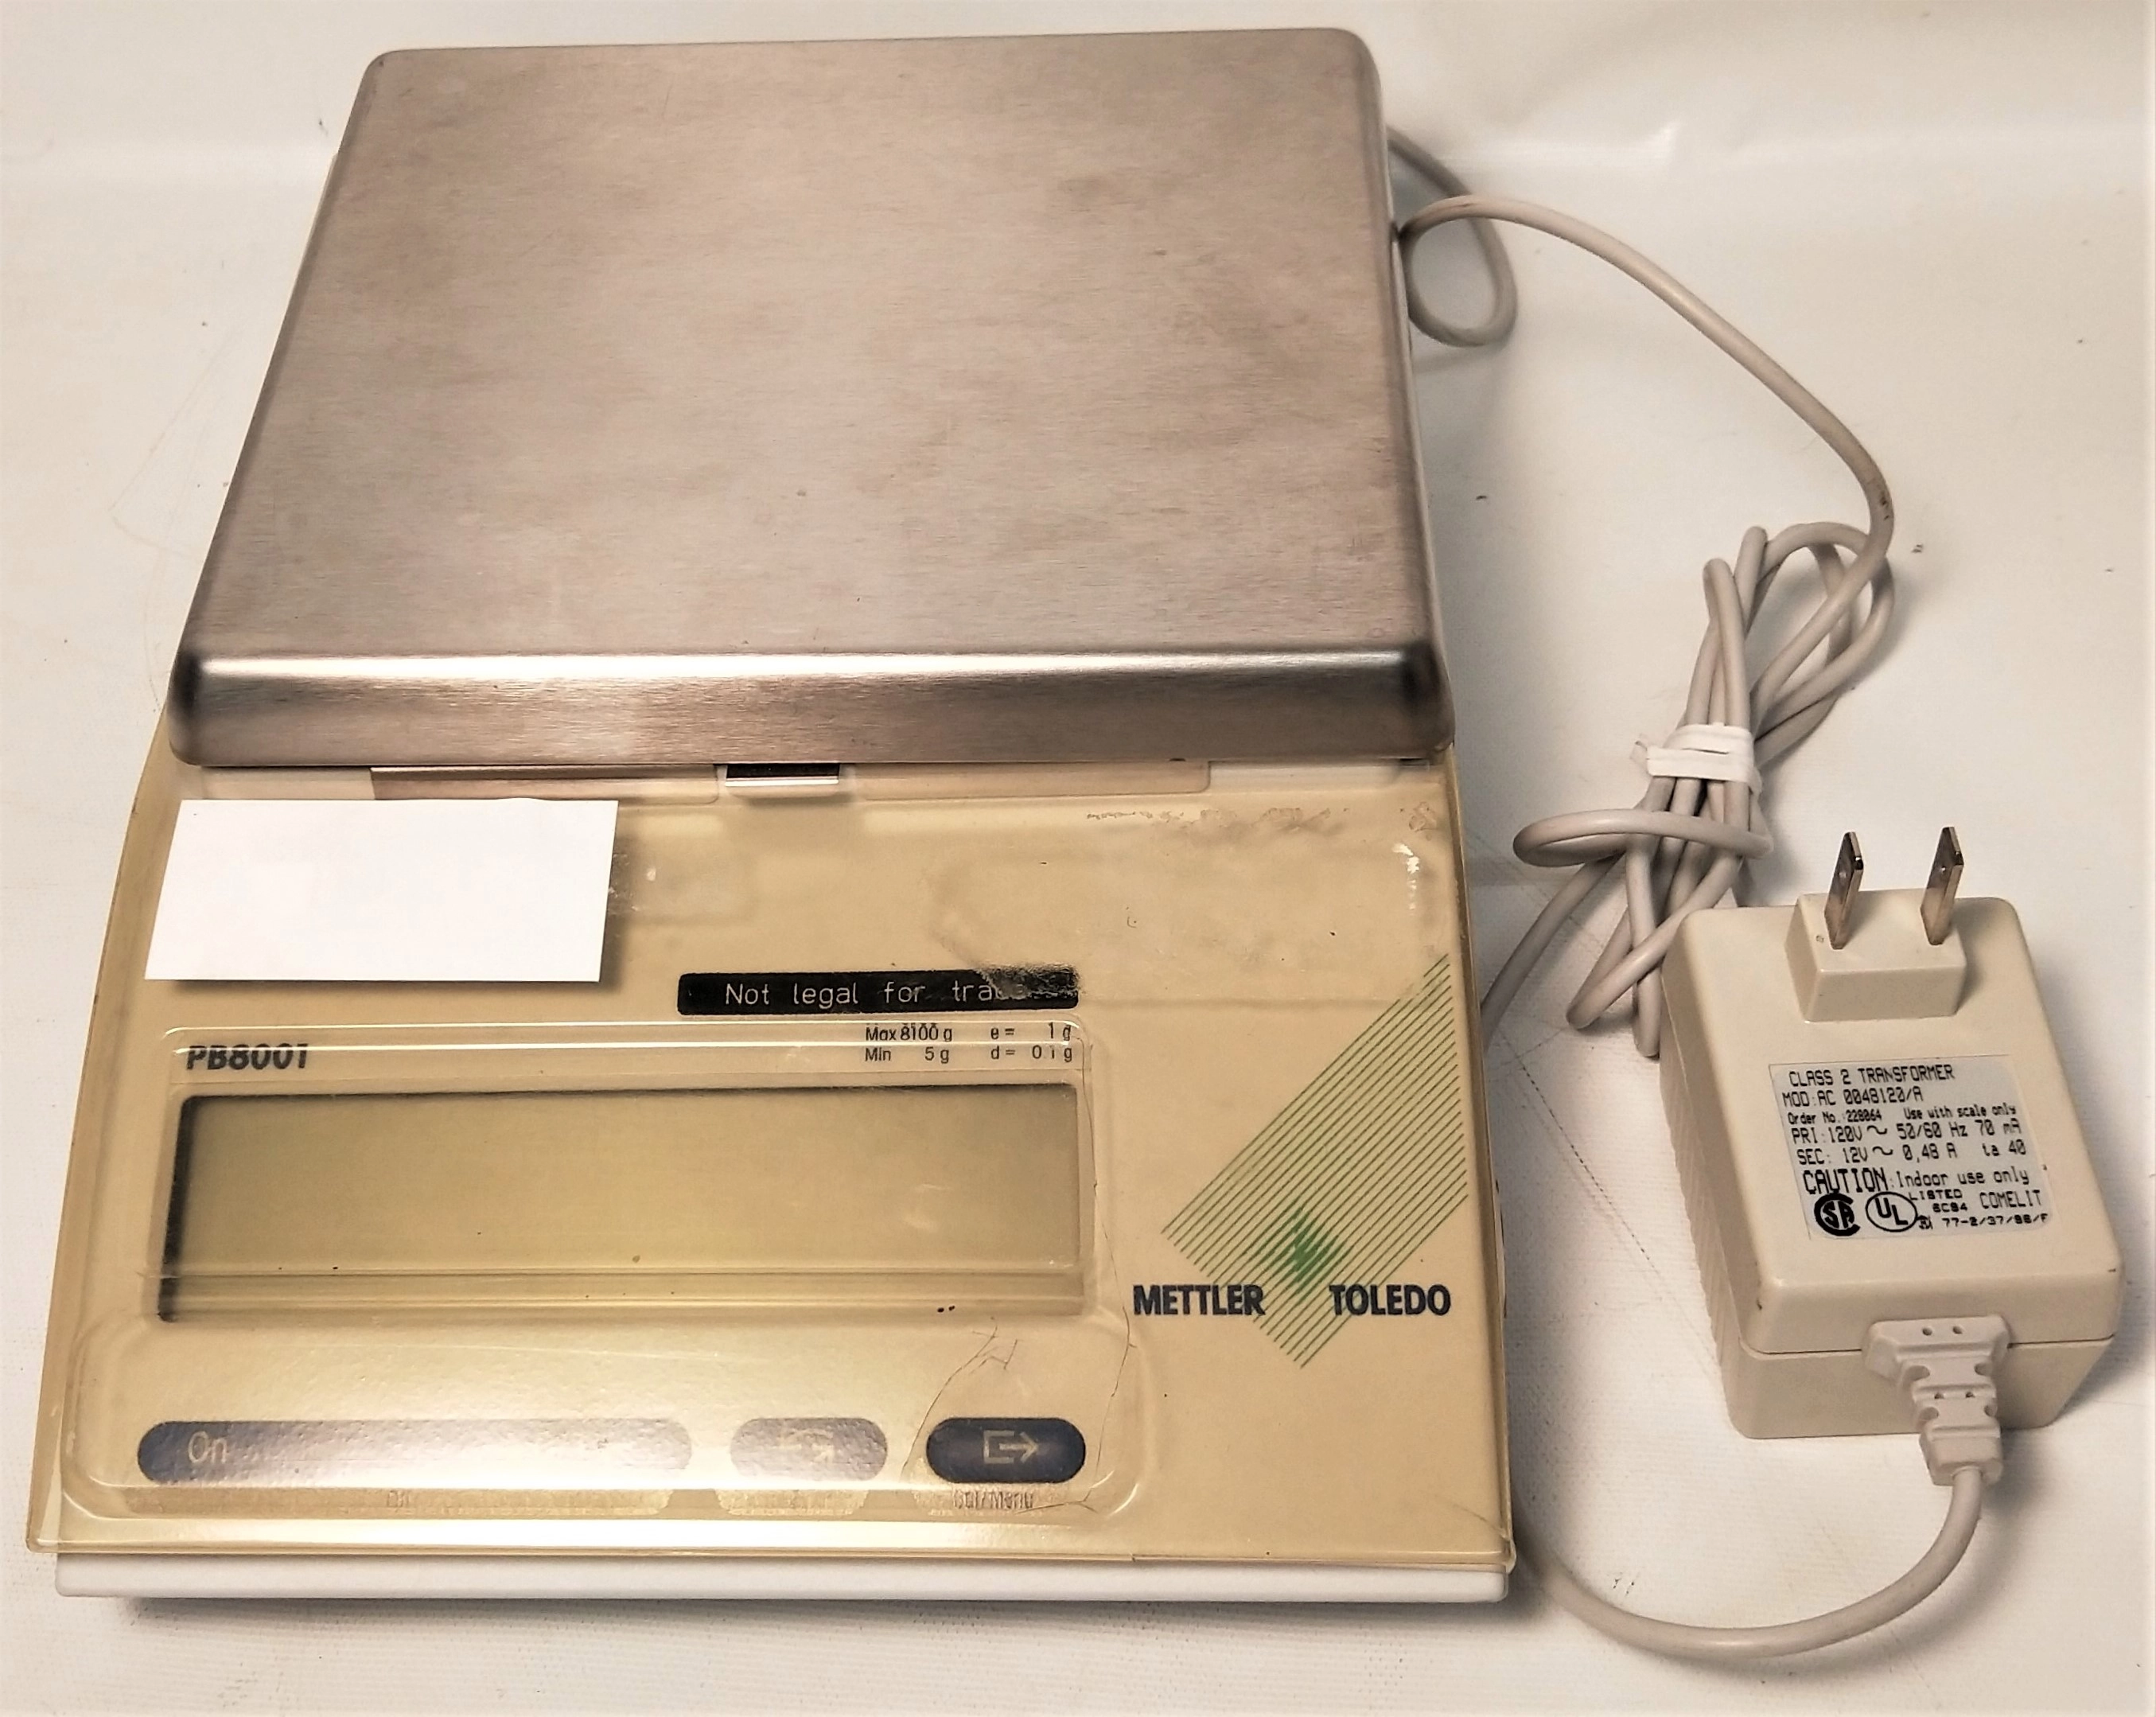 Used Ohaus 700/800 Series Triple Beam Balance - 610g x 0.1g for Sale at  Chemistry RG Consultant Inc